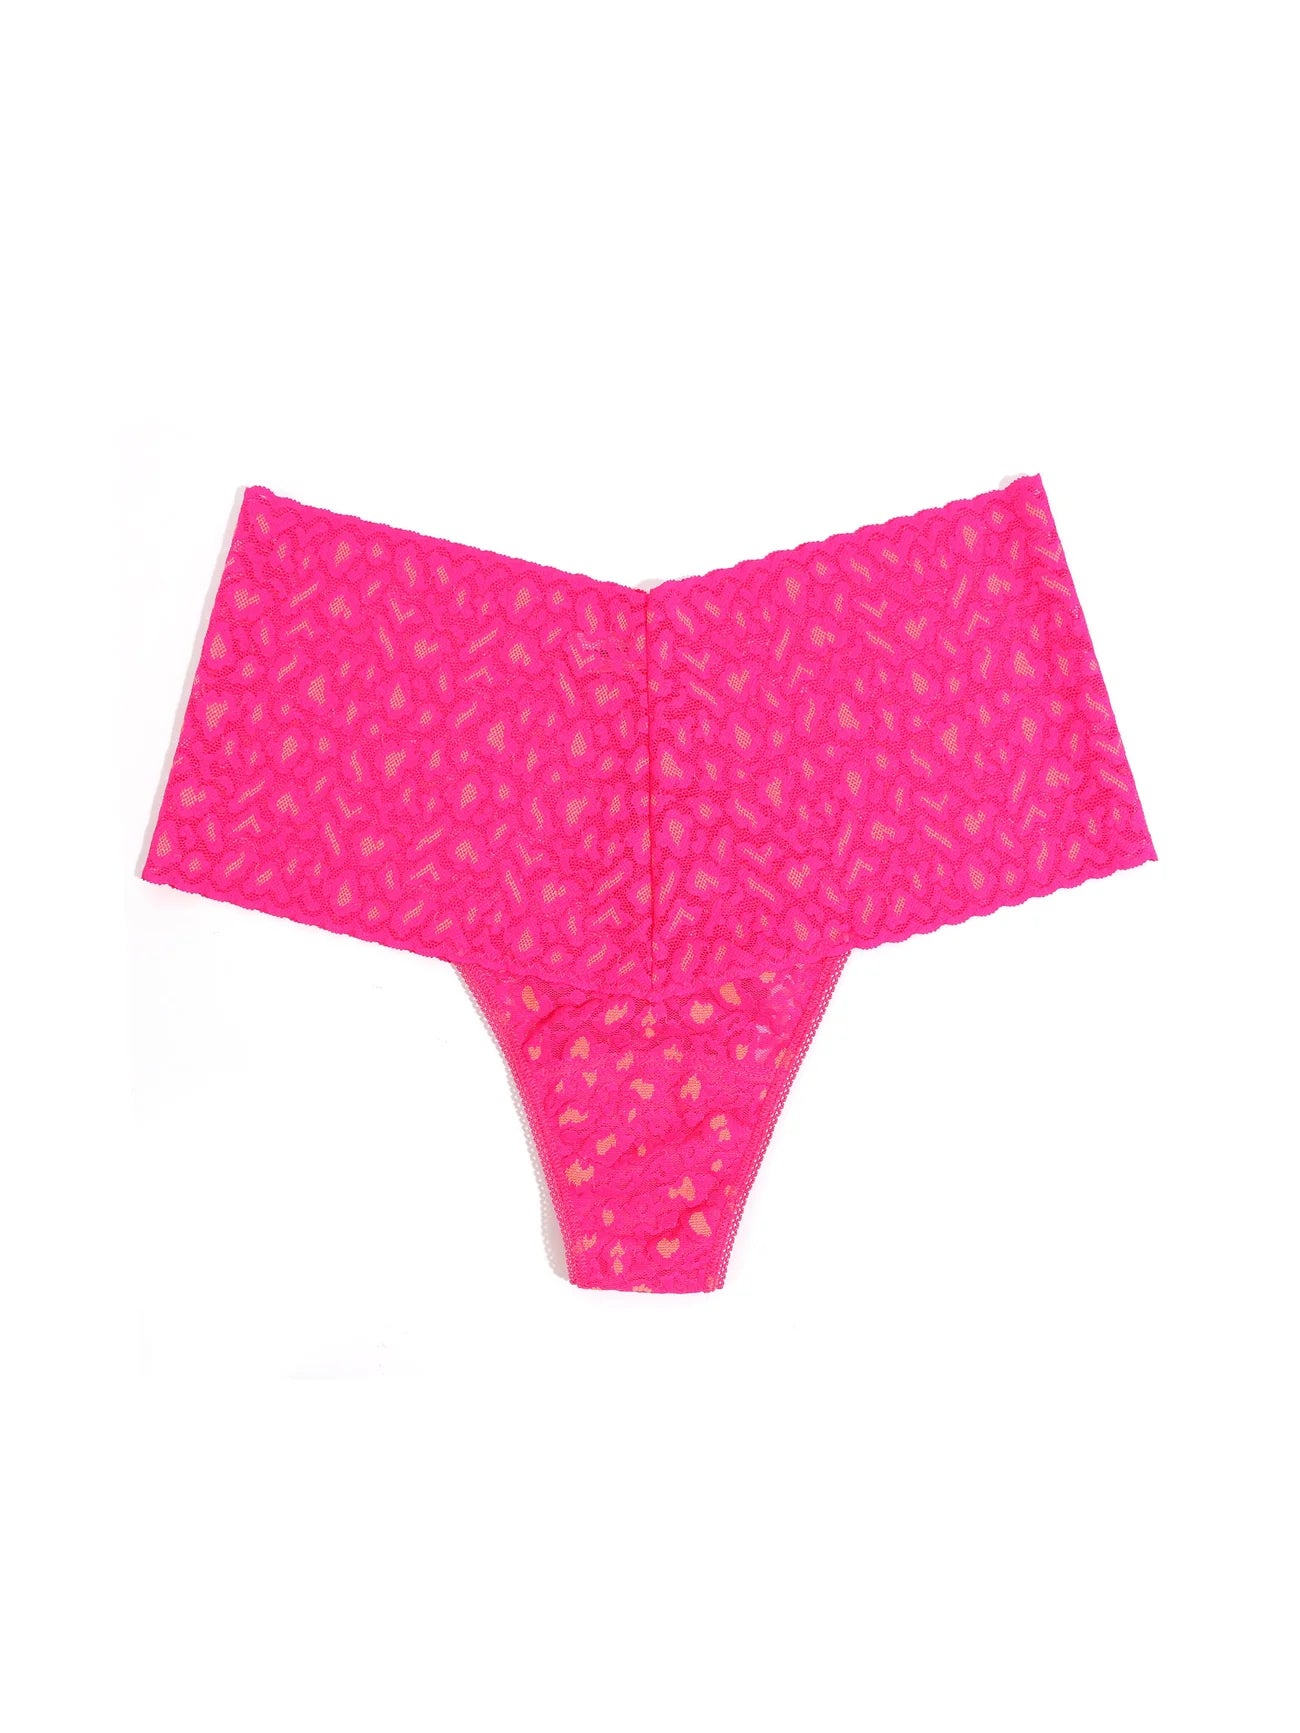 Cross-Dyed Leopard Retro Thong